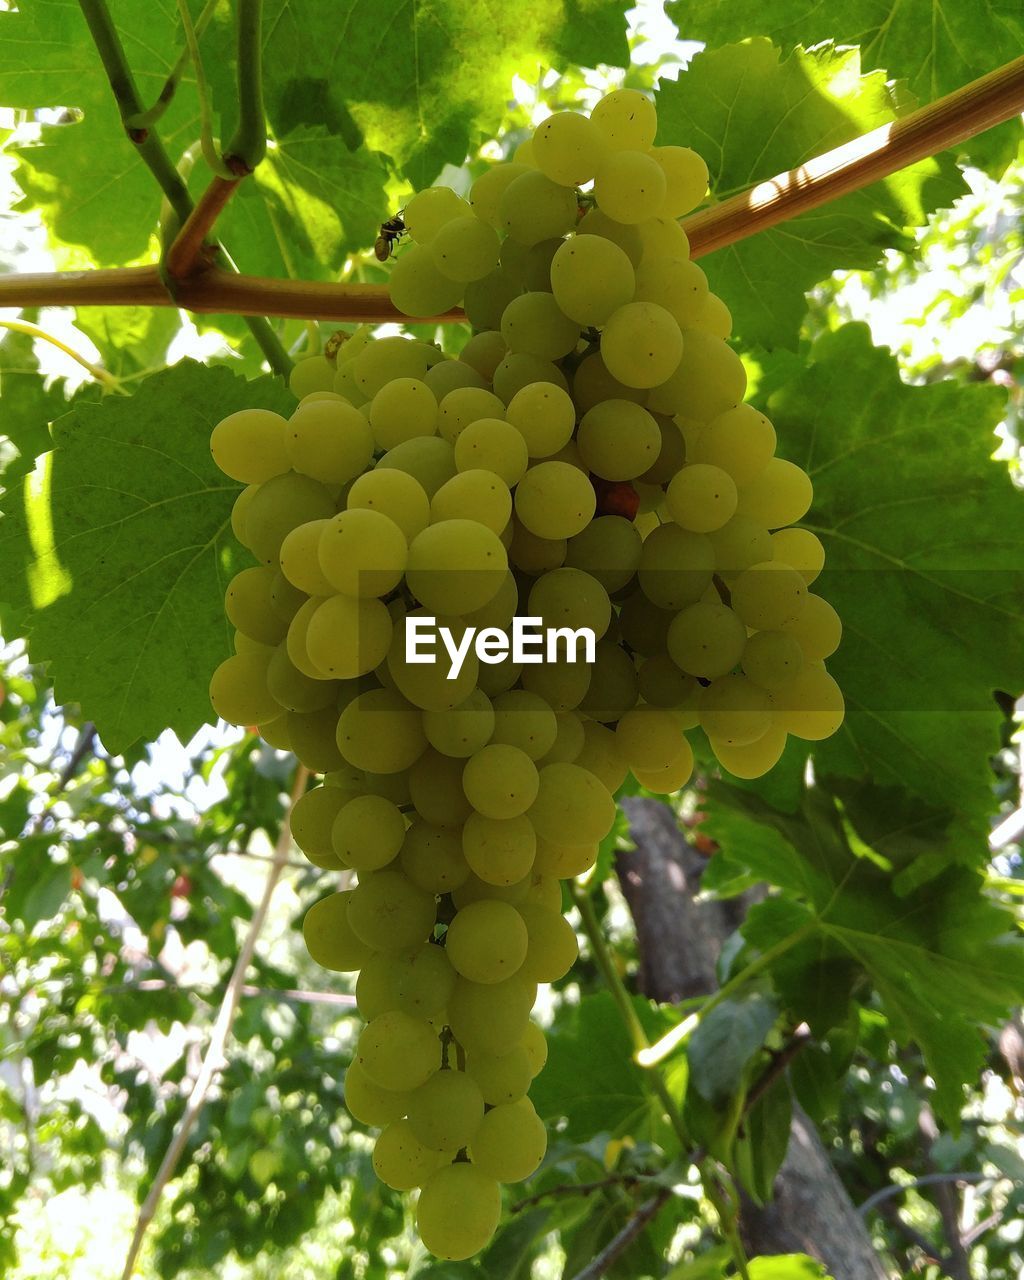 LOW ANGLE VIEW OF GRAPES HANGING FROM TREE